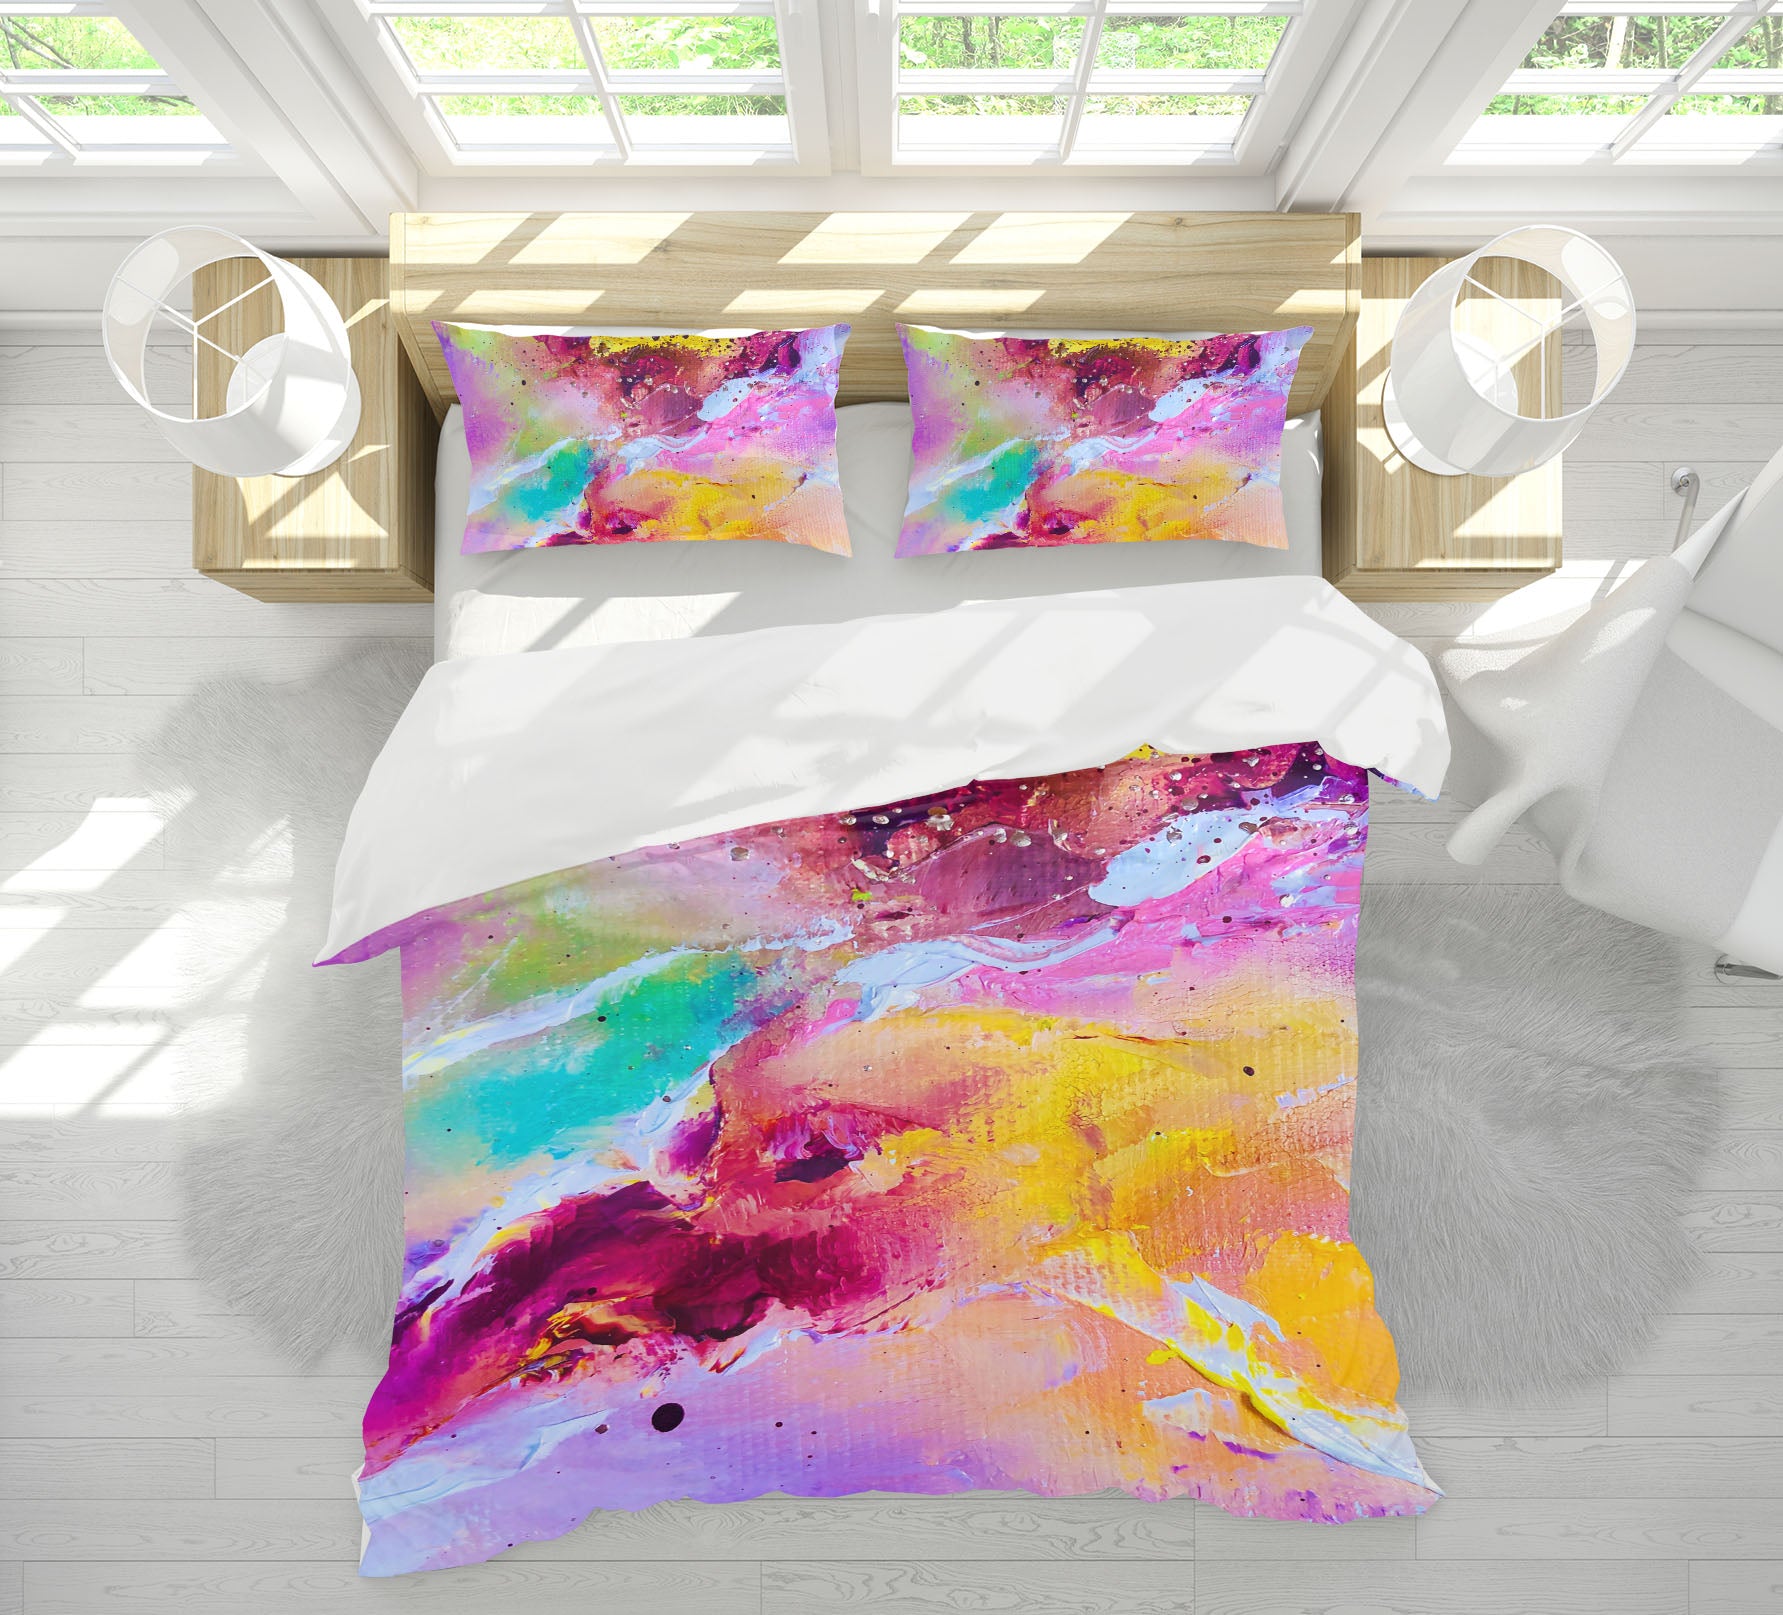 3D Colorful Watercolor 628 Skromova Marina Bedding Bed Pillowcases Quilt